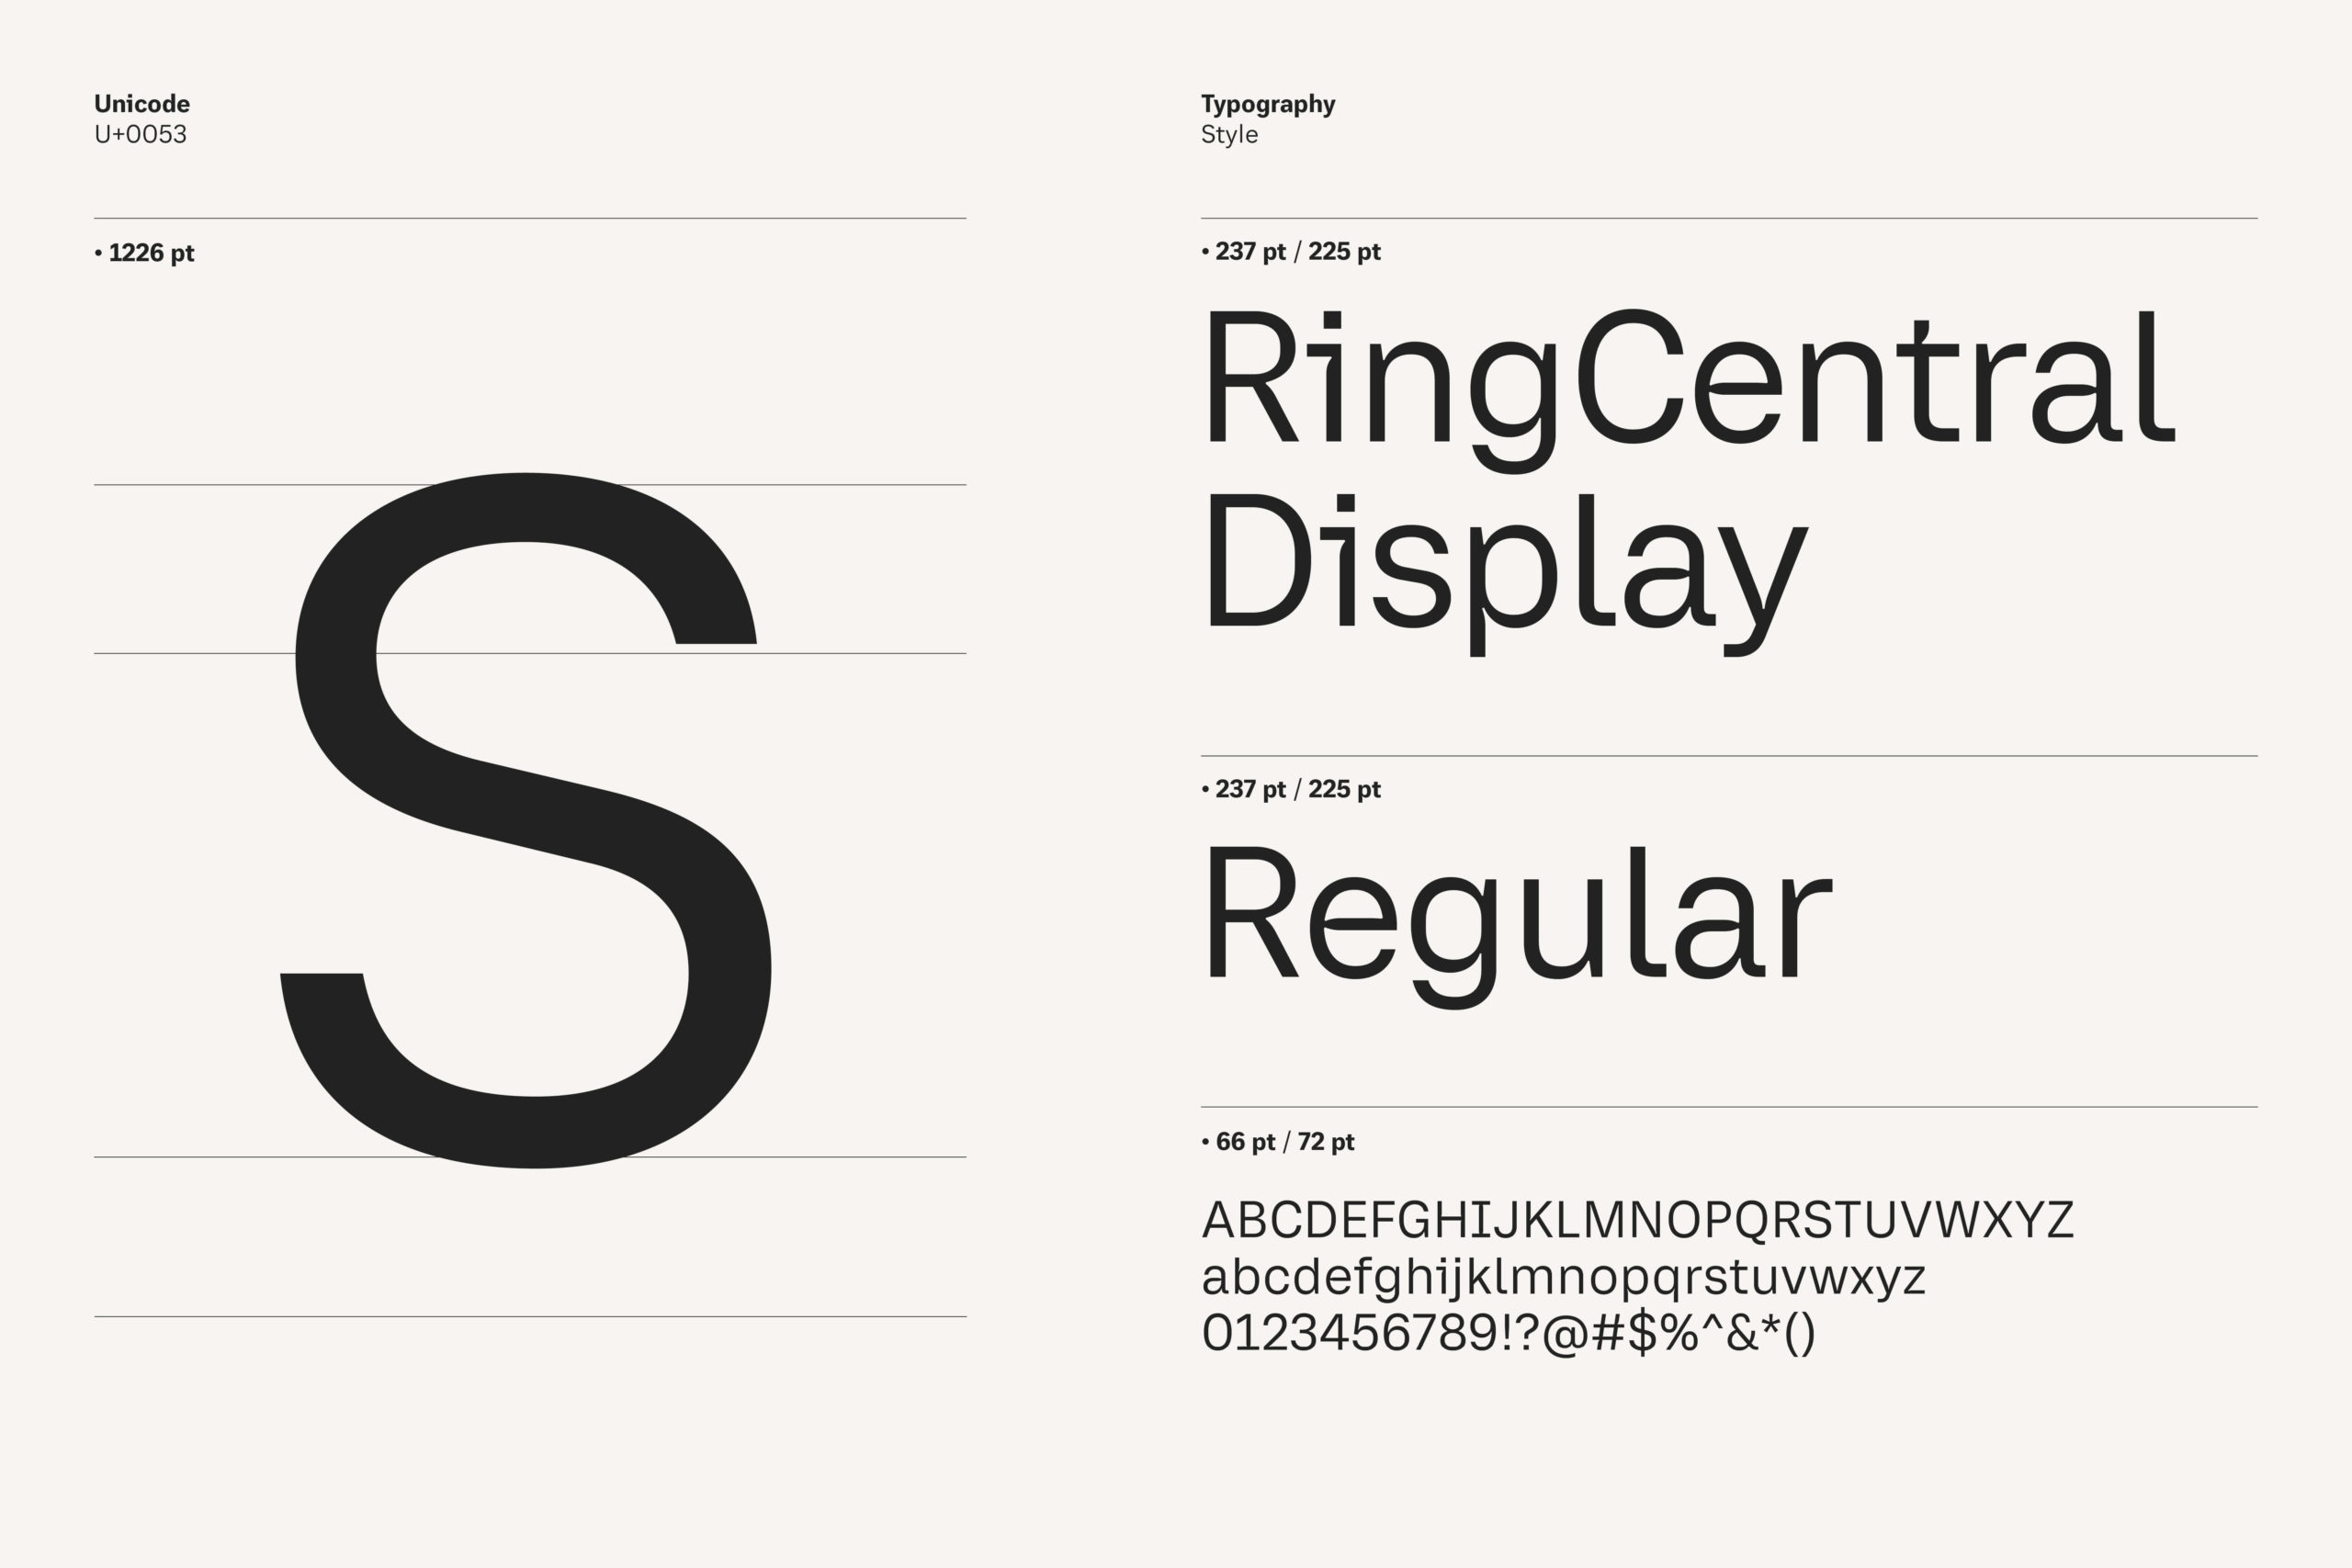 RingCentral Display_Typeface_0914226